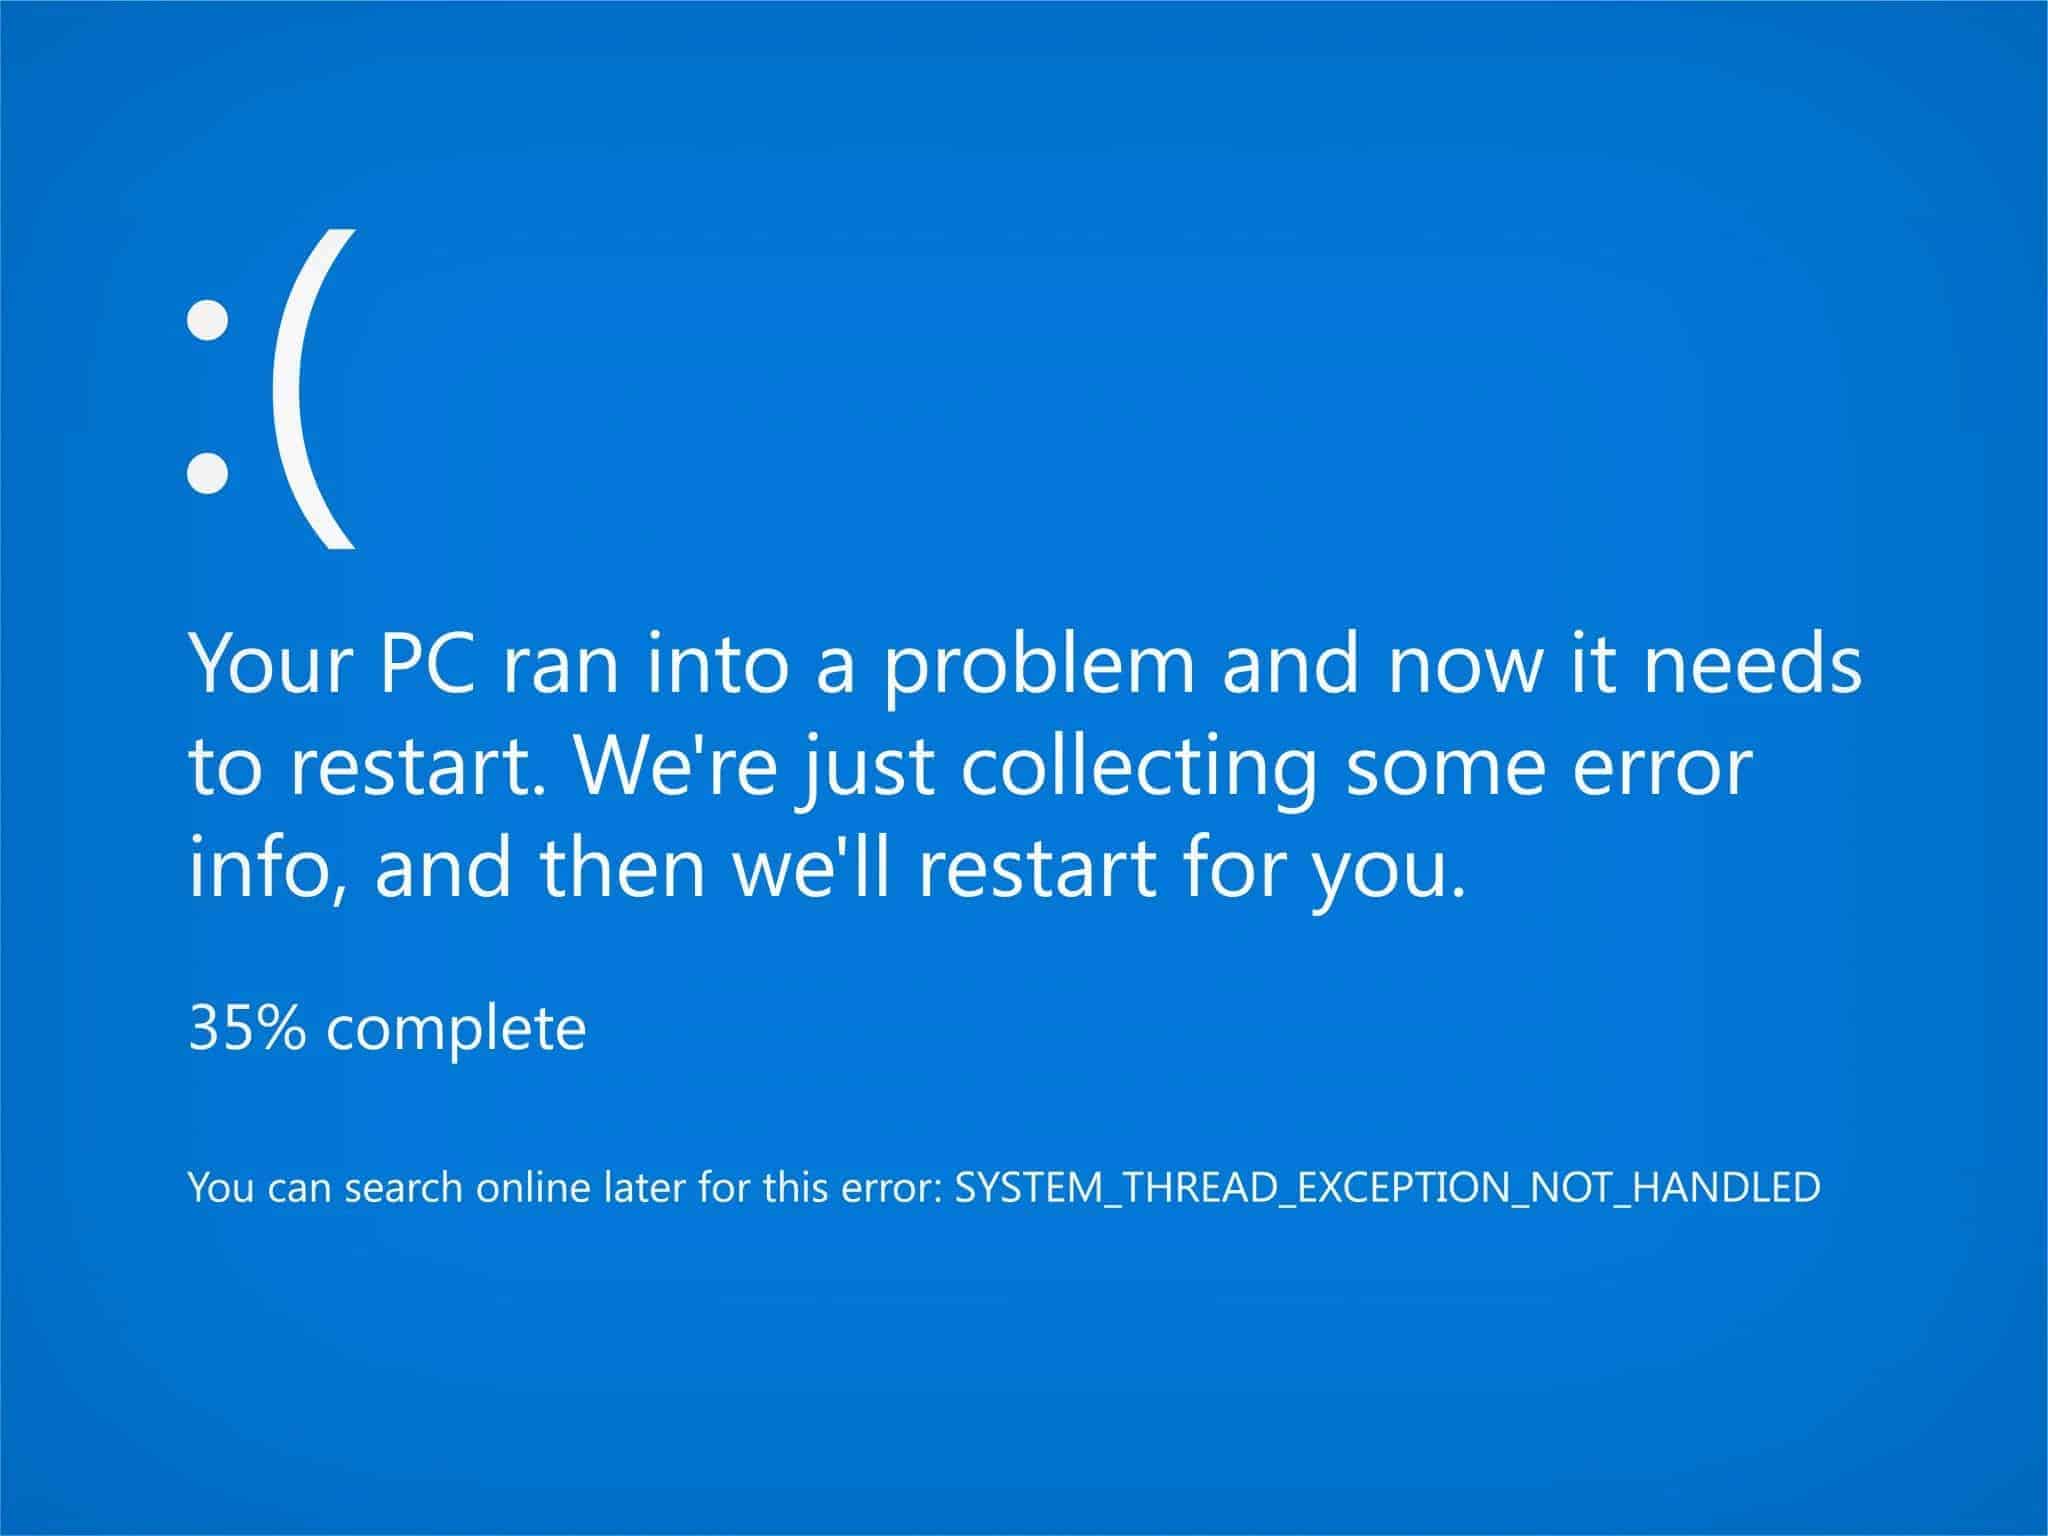 your-pc-ran-into-a-problem-and-needs-to-restart.jpg